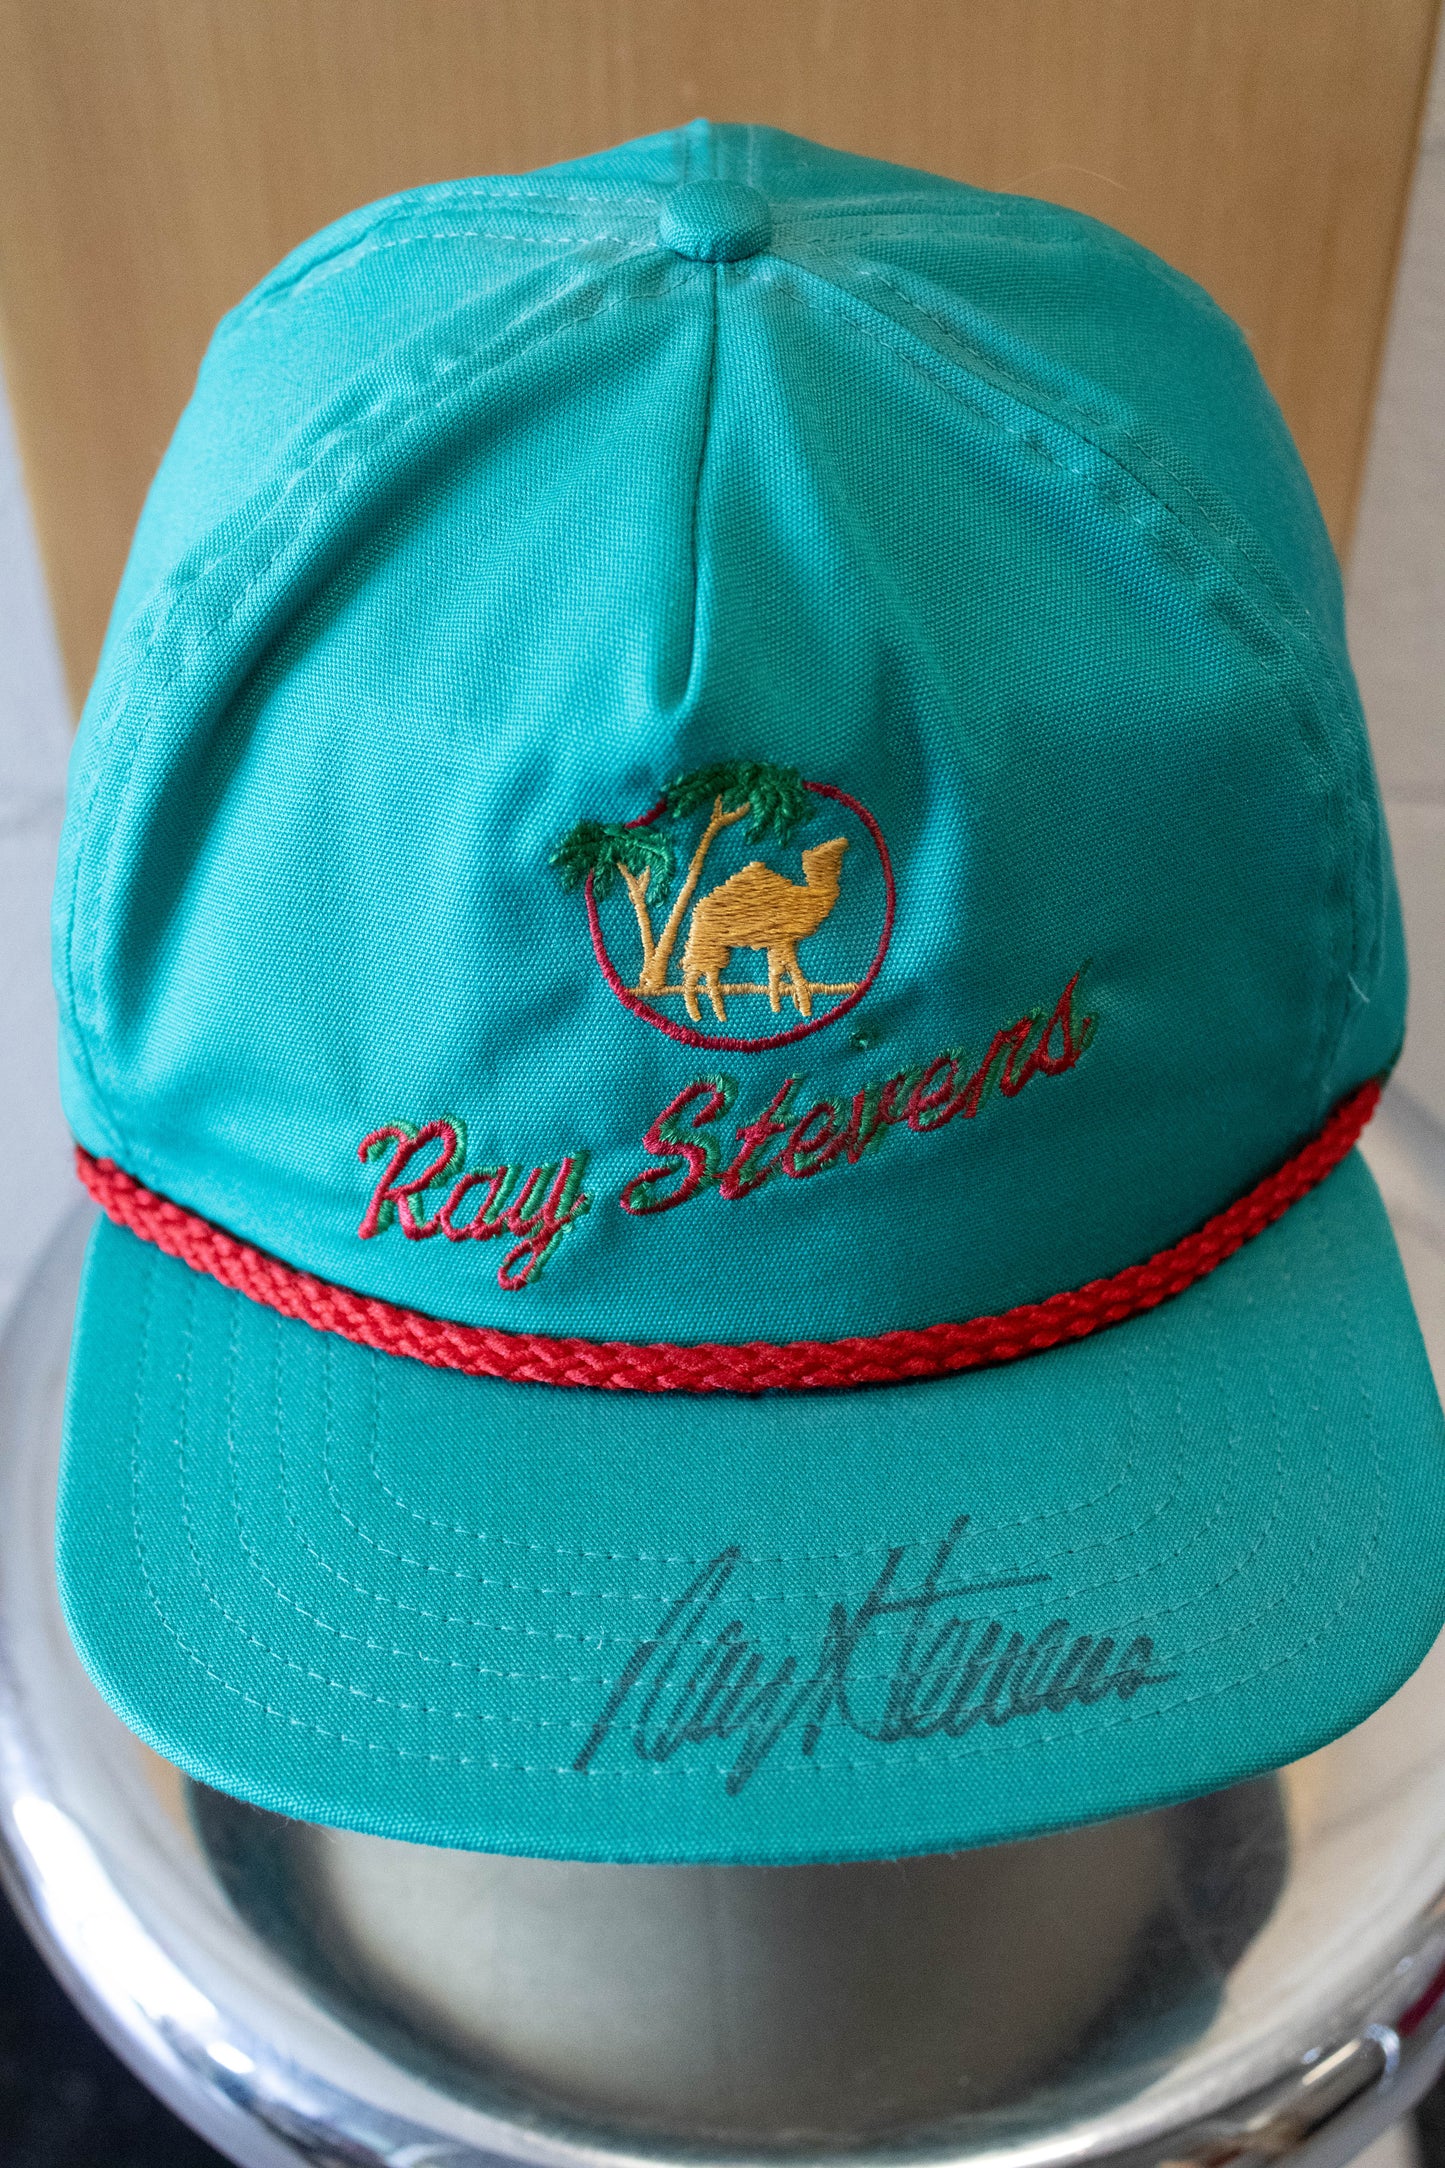 Ray Stevens Signed Autograph Trucker Hat